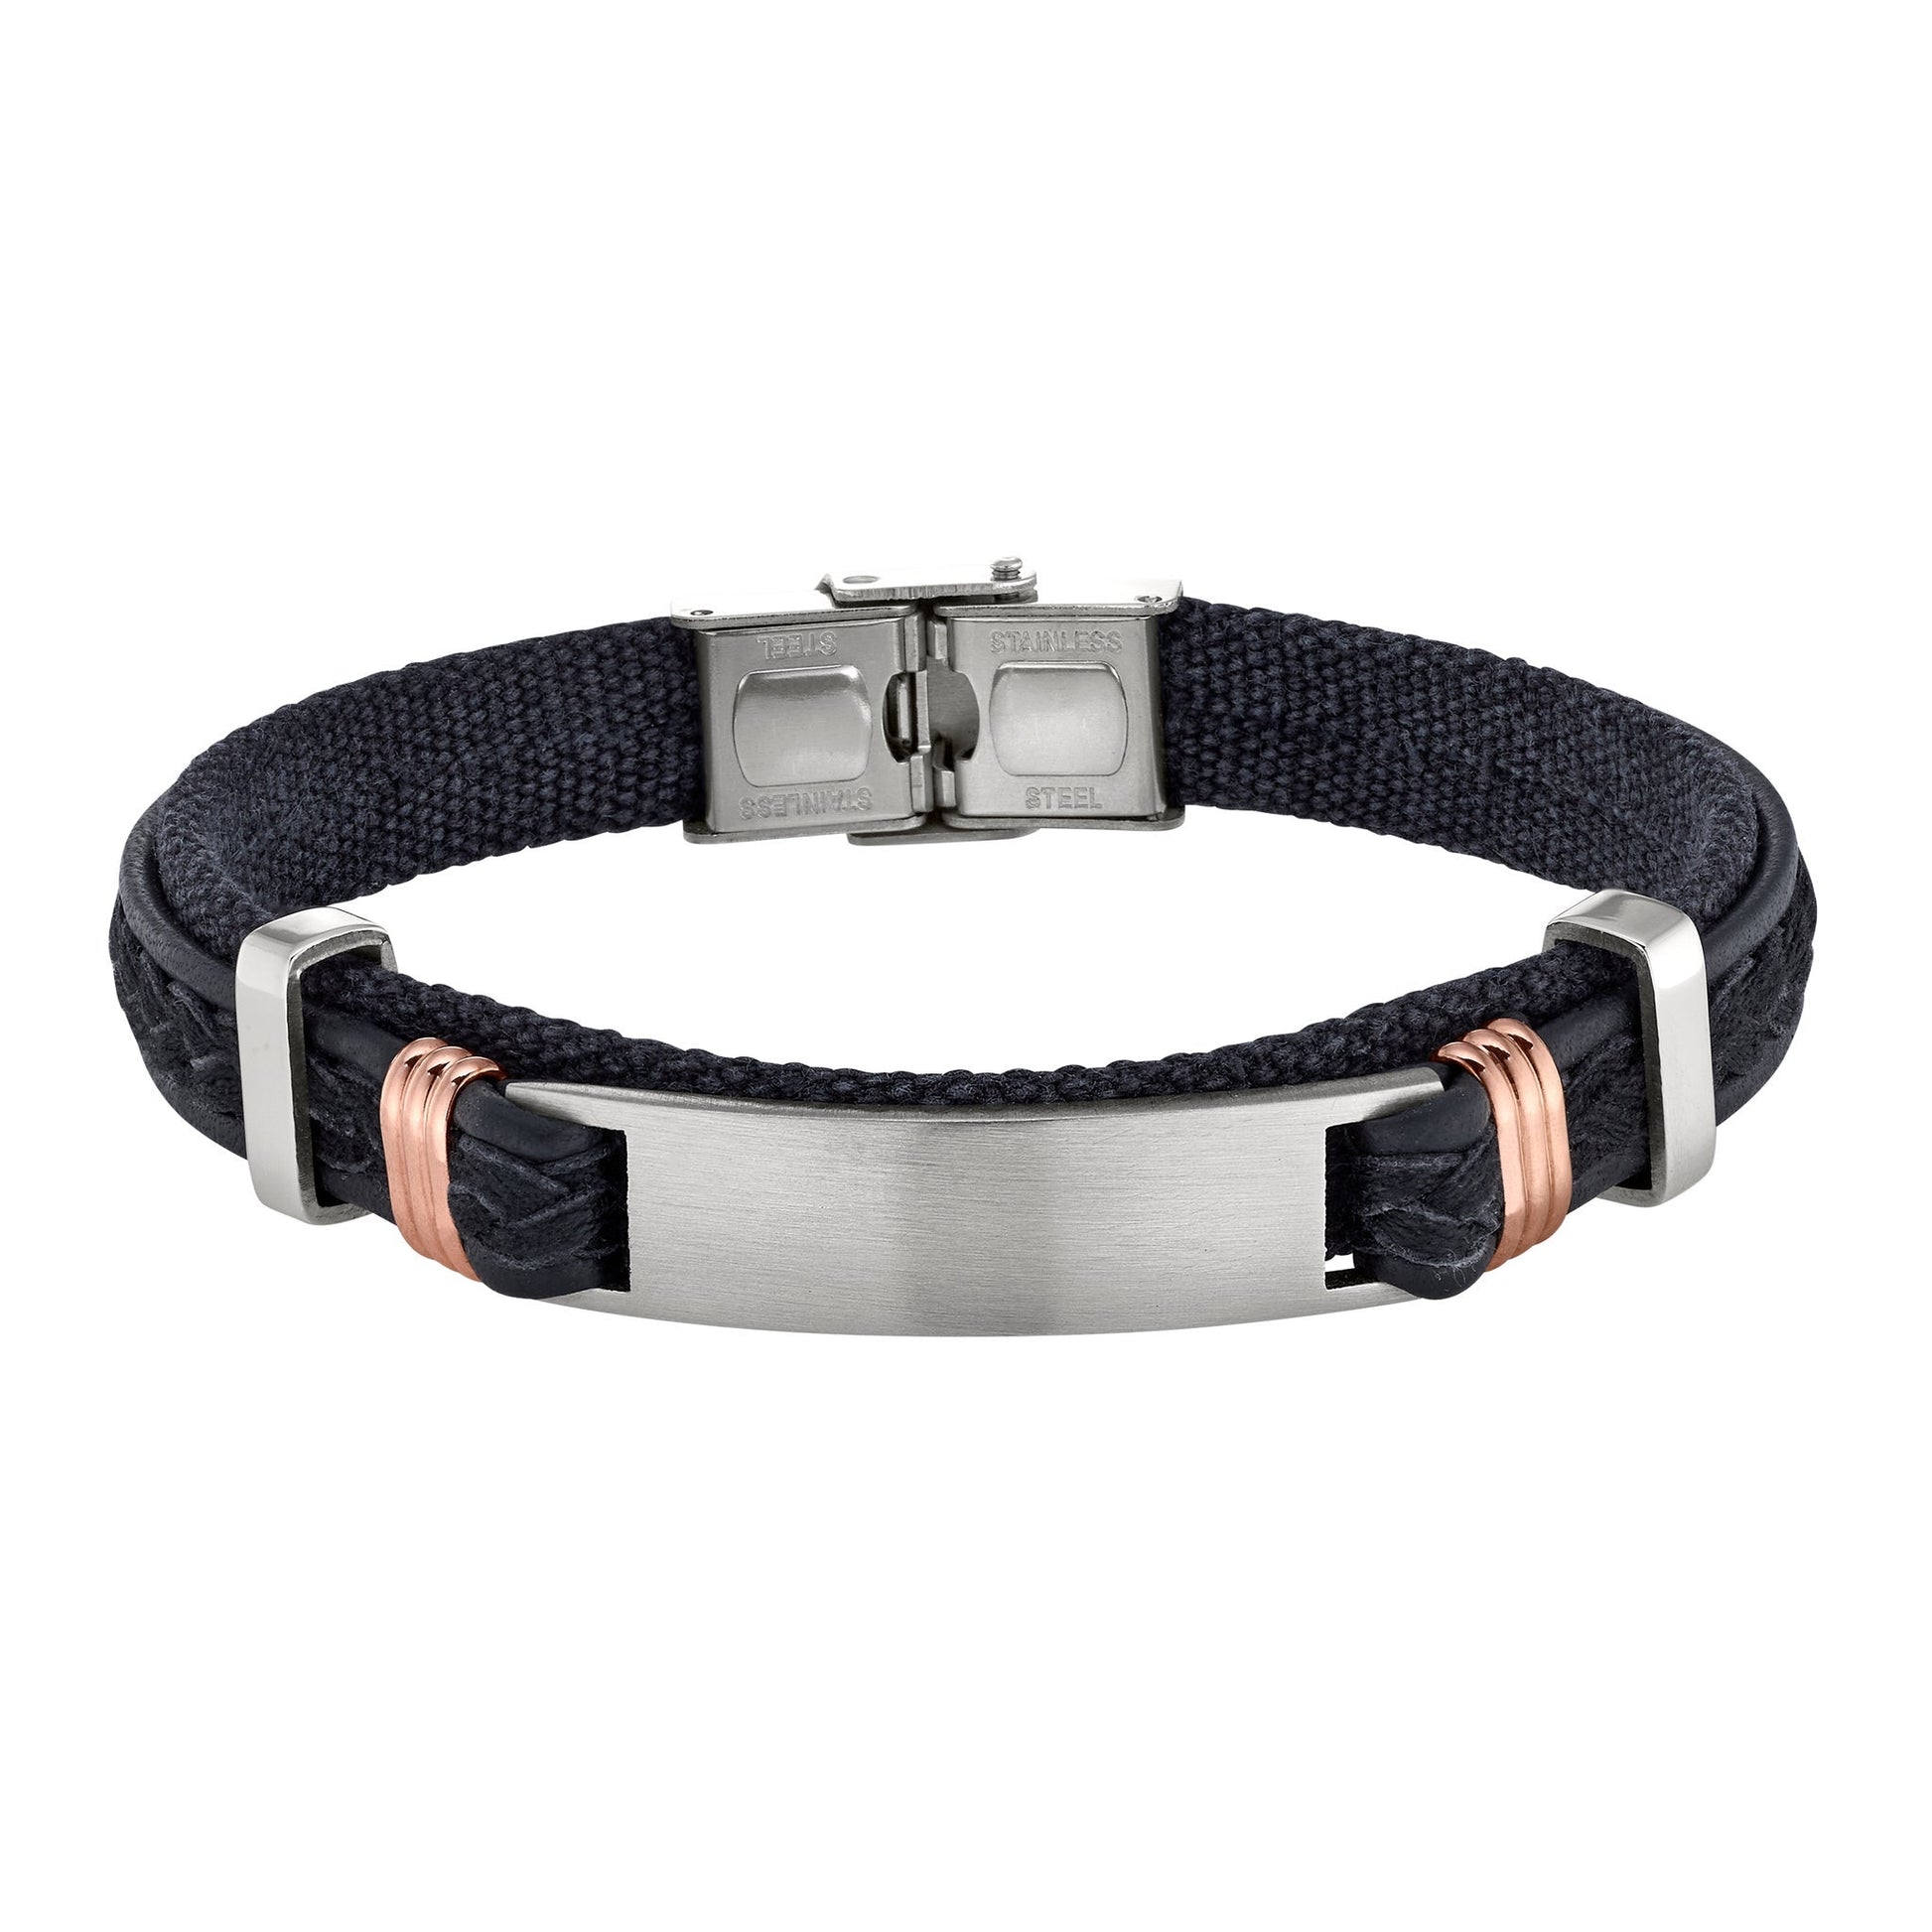 A black leather and fabric bracelet with large cenral stainless steel bar displayed on a neutral white background.